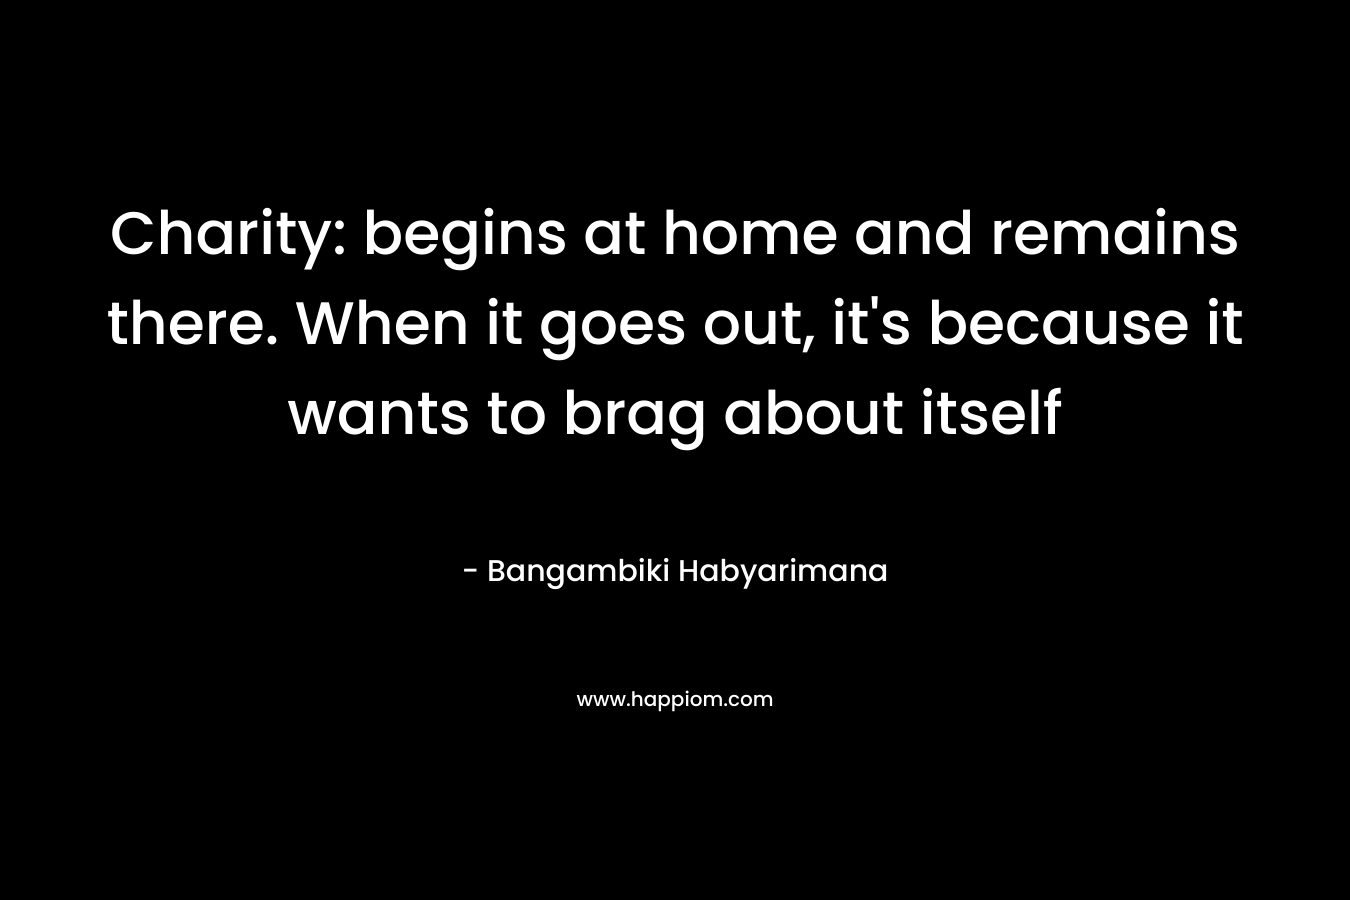 Charity: begins at home and remains there. When it goes out, it’s because it wants to brag about itself – Bangambiki Habyarimana